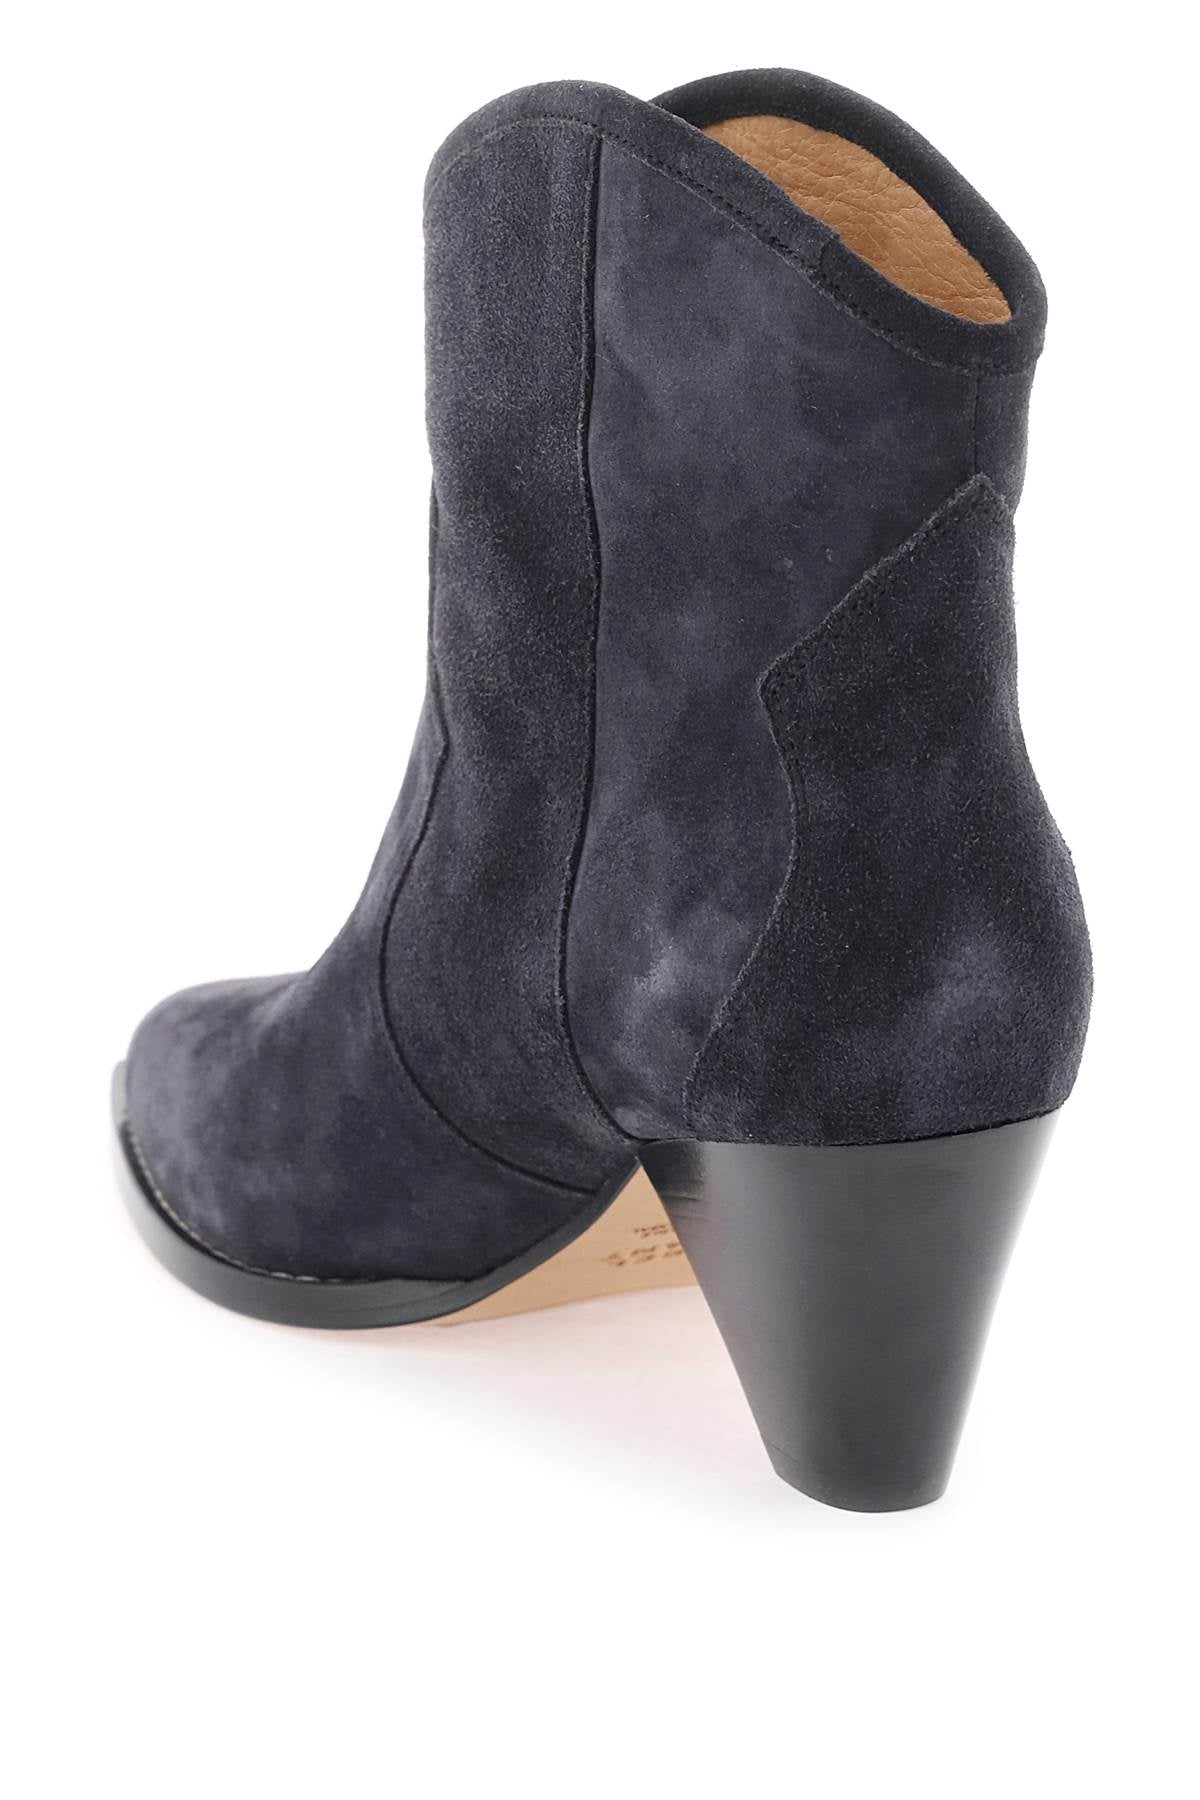 Isabel marant 'darizo' suede ankle-boots-2